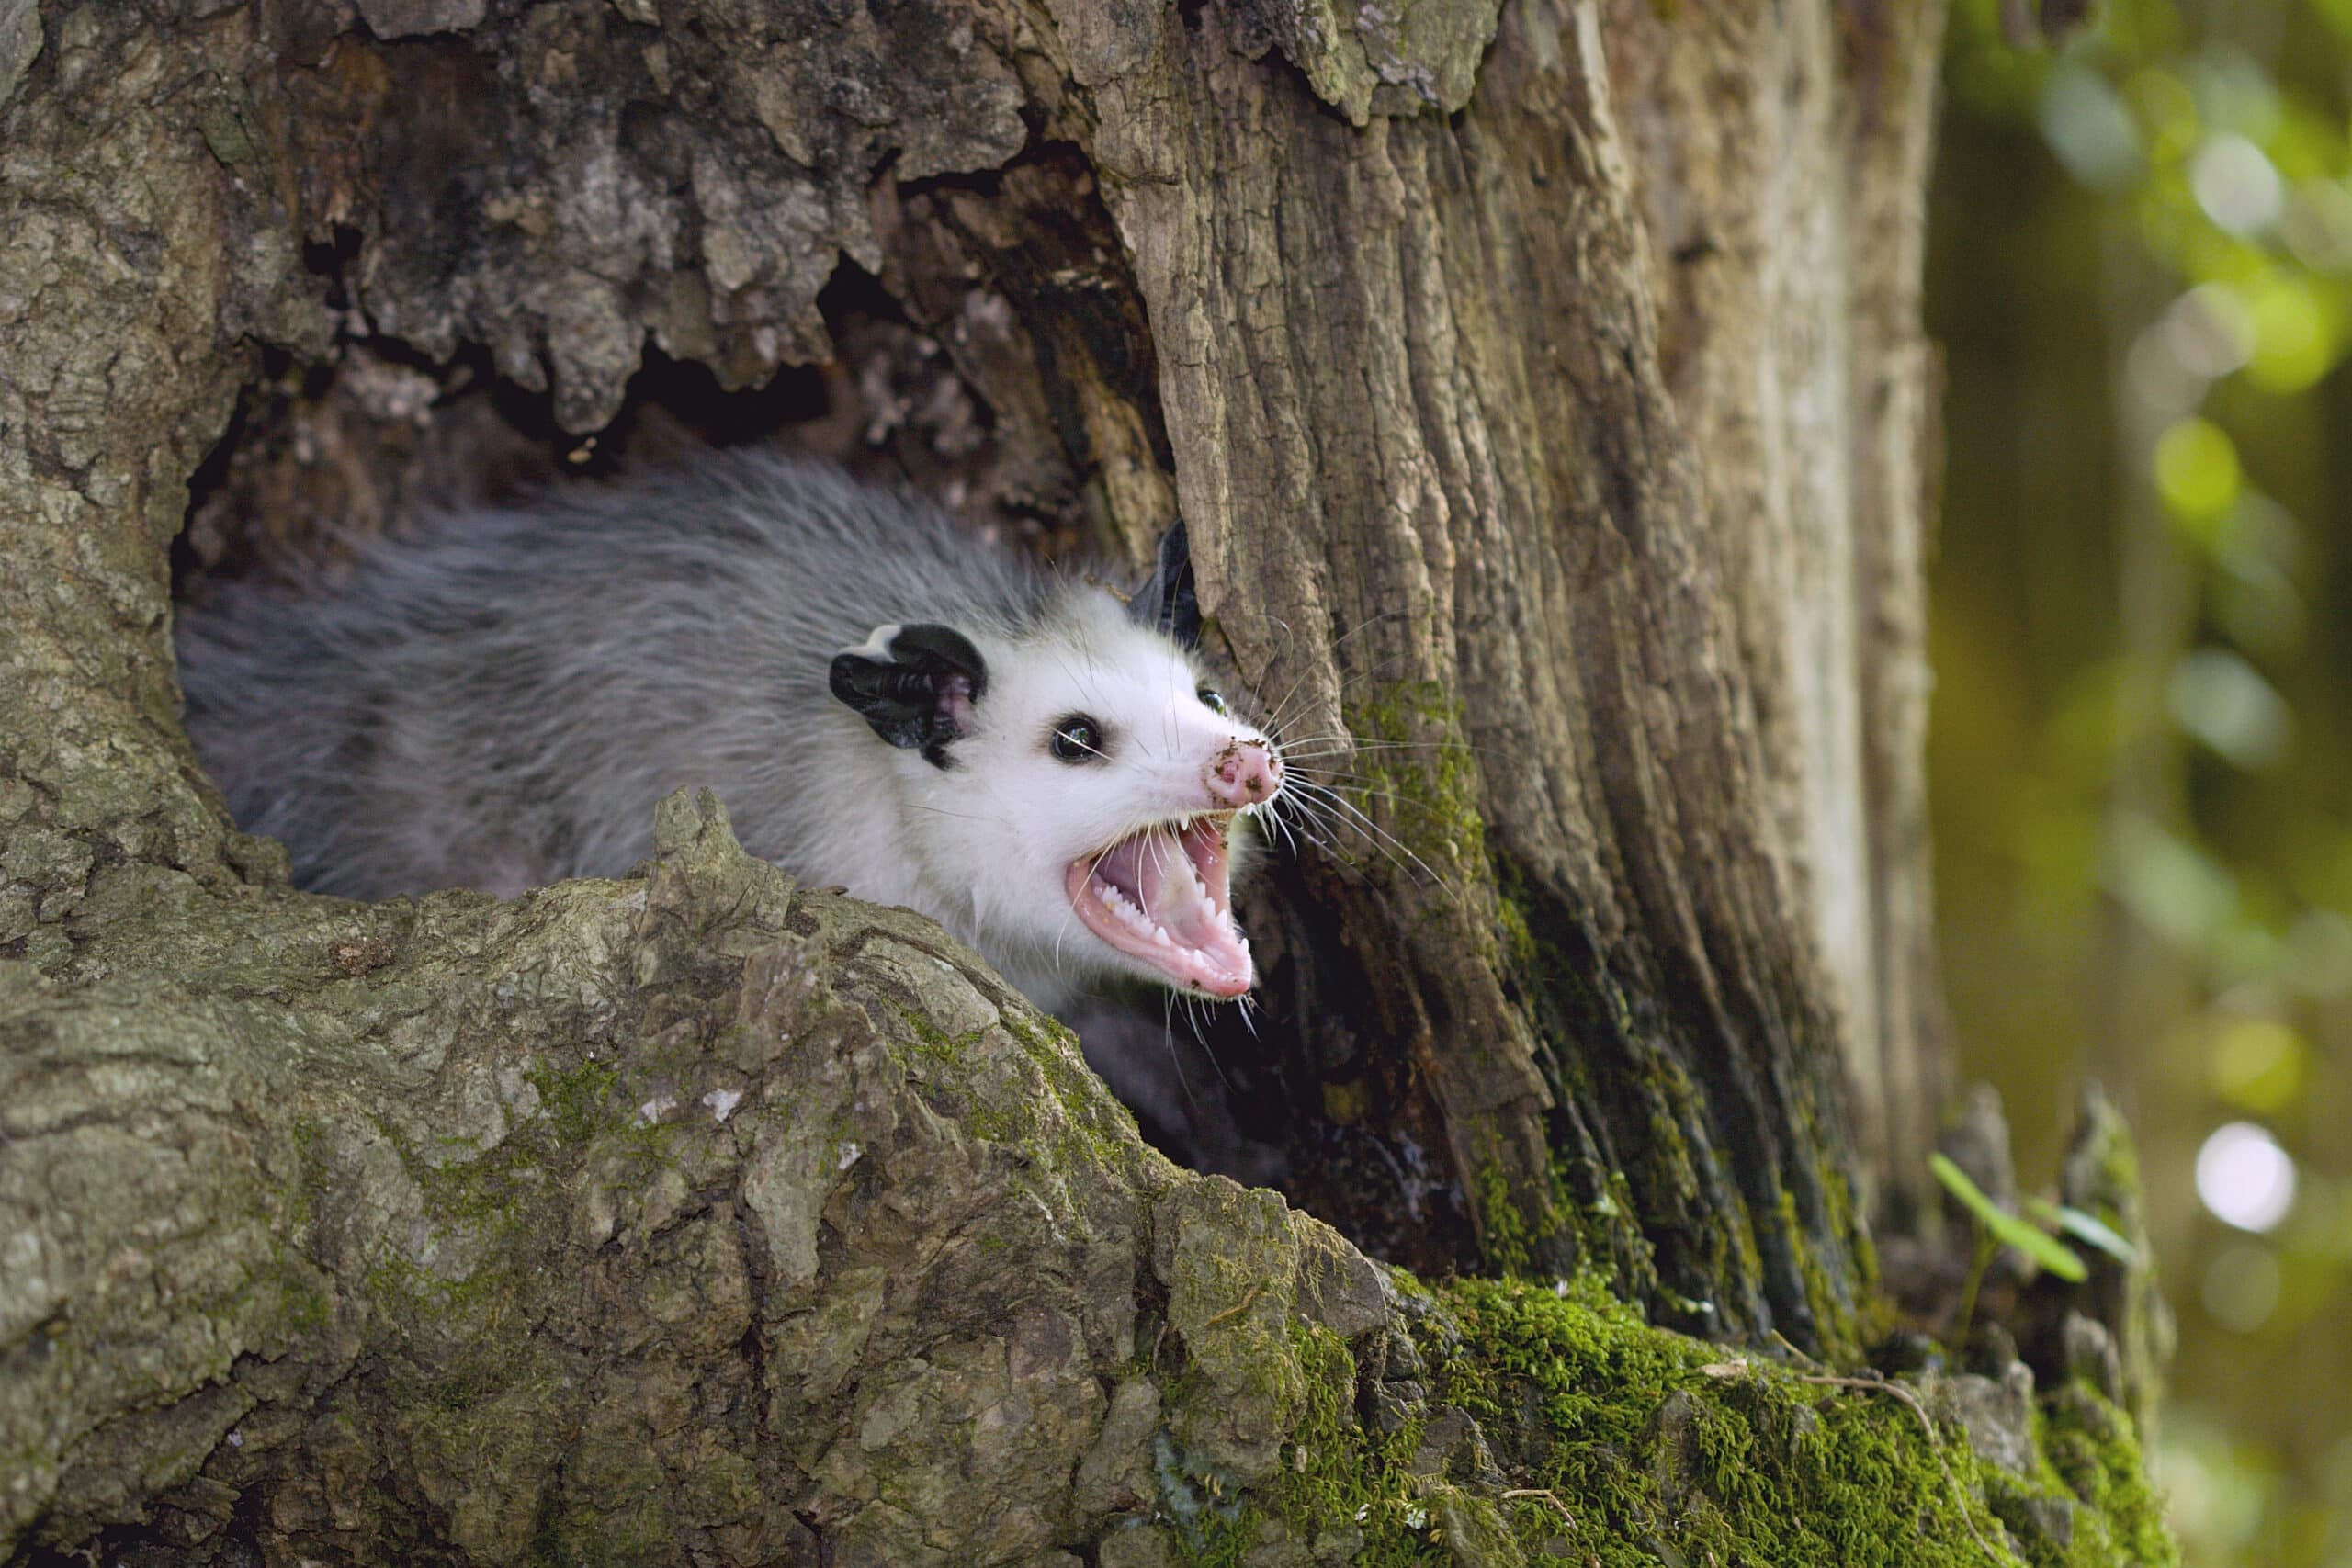 Are Opossums Bad to Have Around?